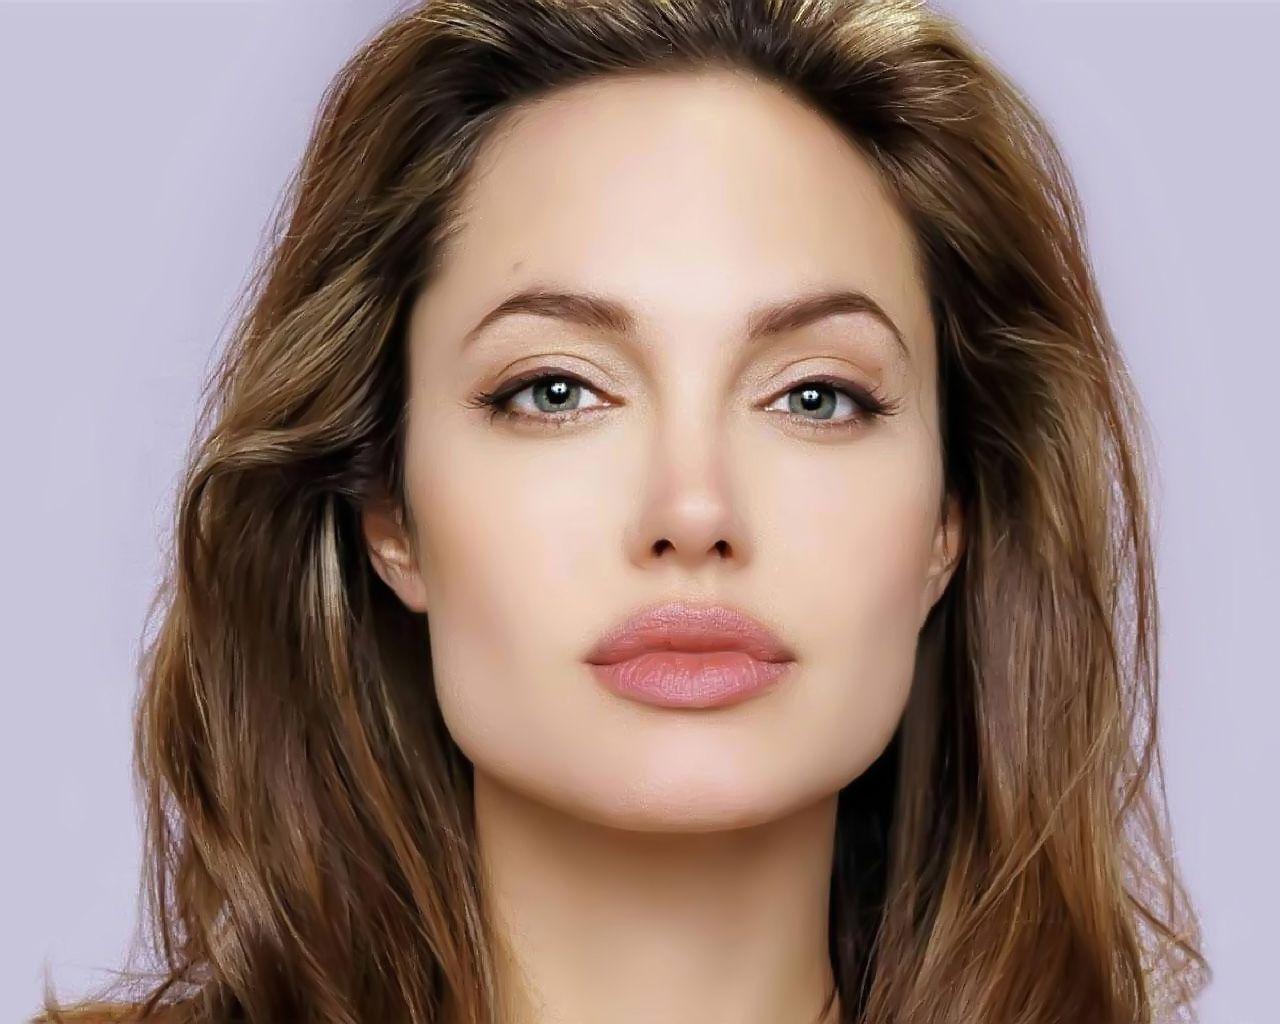 Angelina Jolie Photo 2017 Picture for Angelina Jolie 2017